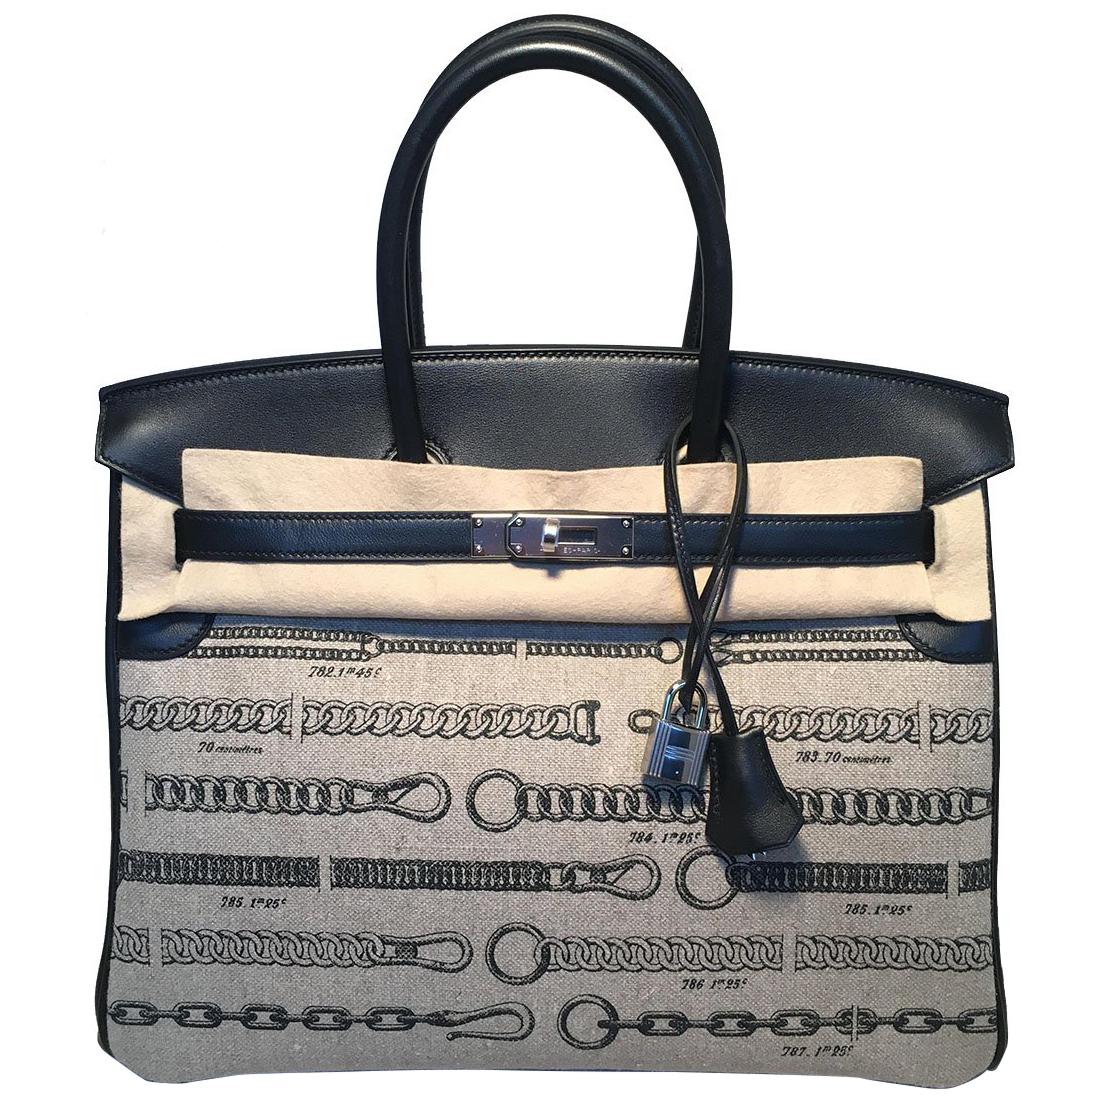 NWOT Limited Edition Hermes Toile de Camp Dechainee Canvas Black 35cm Birkin Bag in excellent condition. Black box calf leather with Toile de Camp Dechainee Canvas knotted rope print exterior trimmed with silver palladium hardware. Signature twist